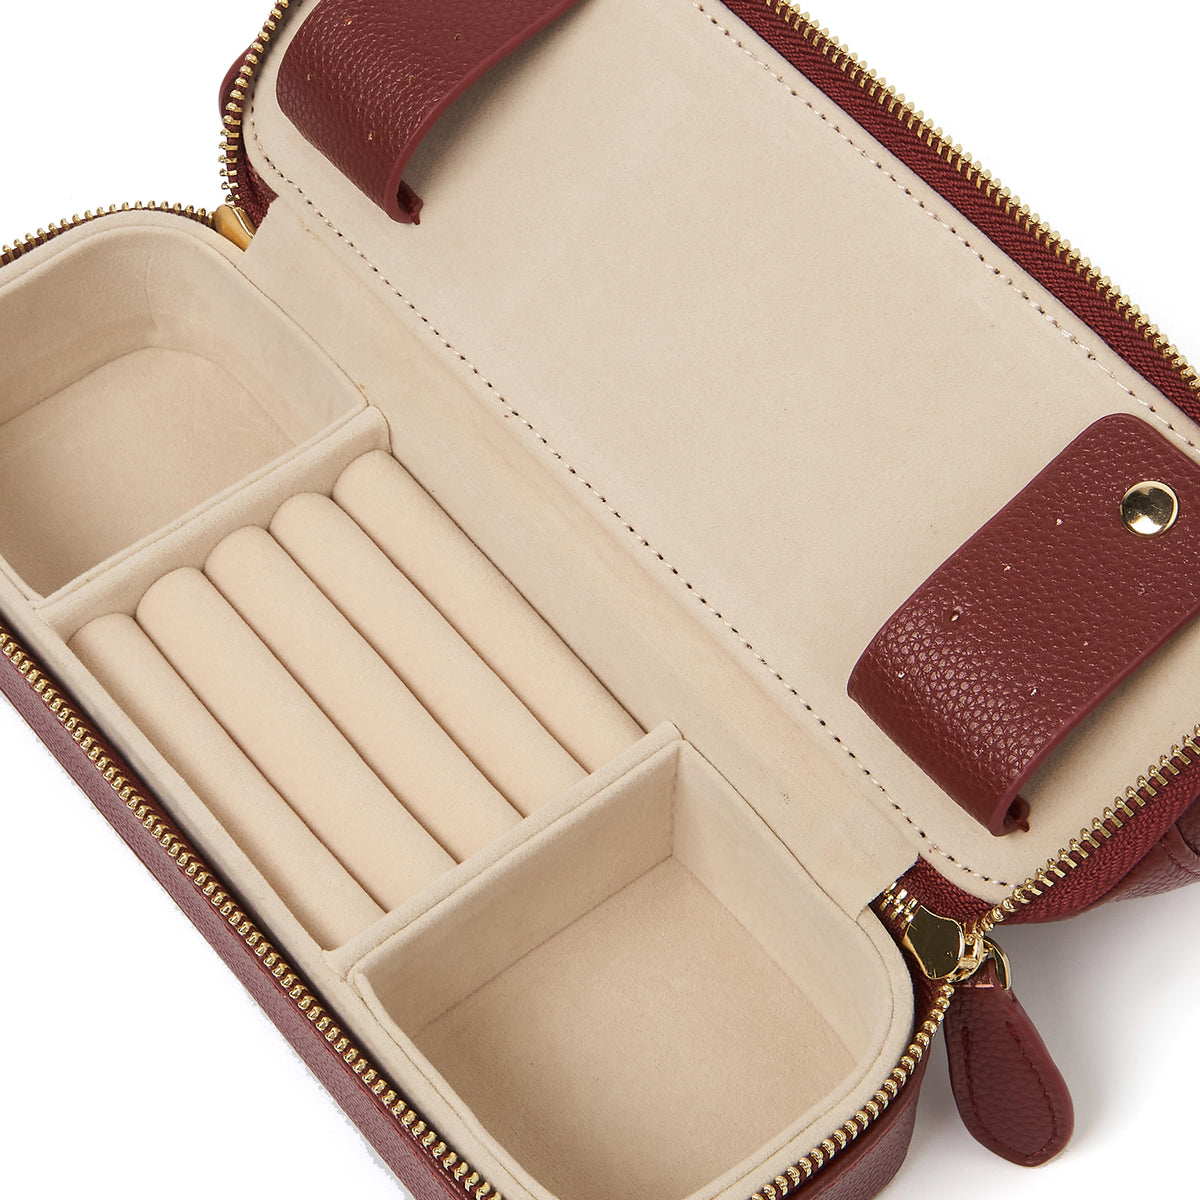 Monroe Jewellery and Cosmetic Travel Bag Burgundy by Arms Of Eve Online, THE ICONIC